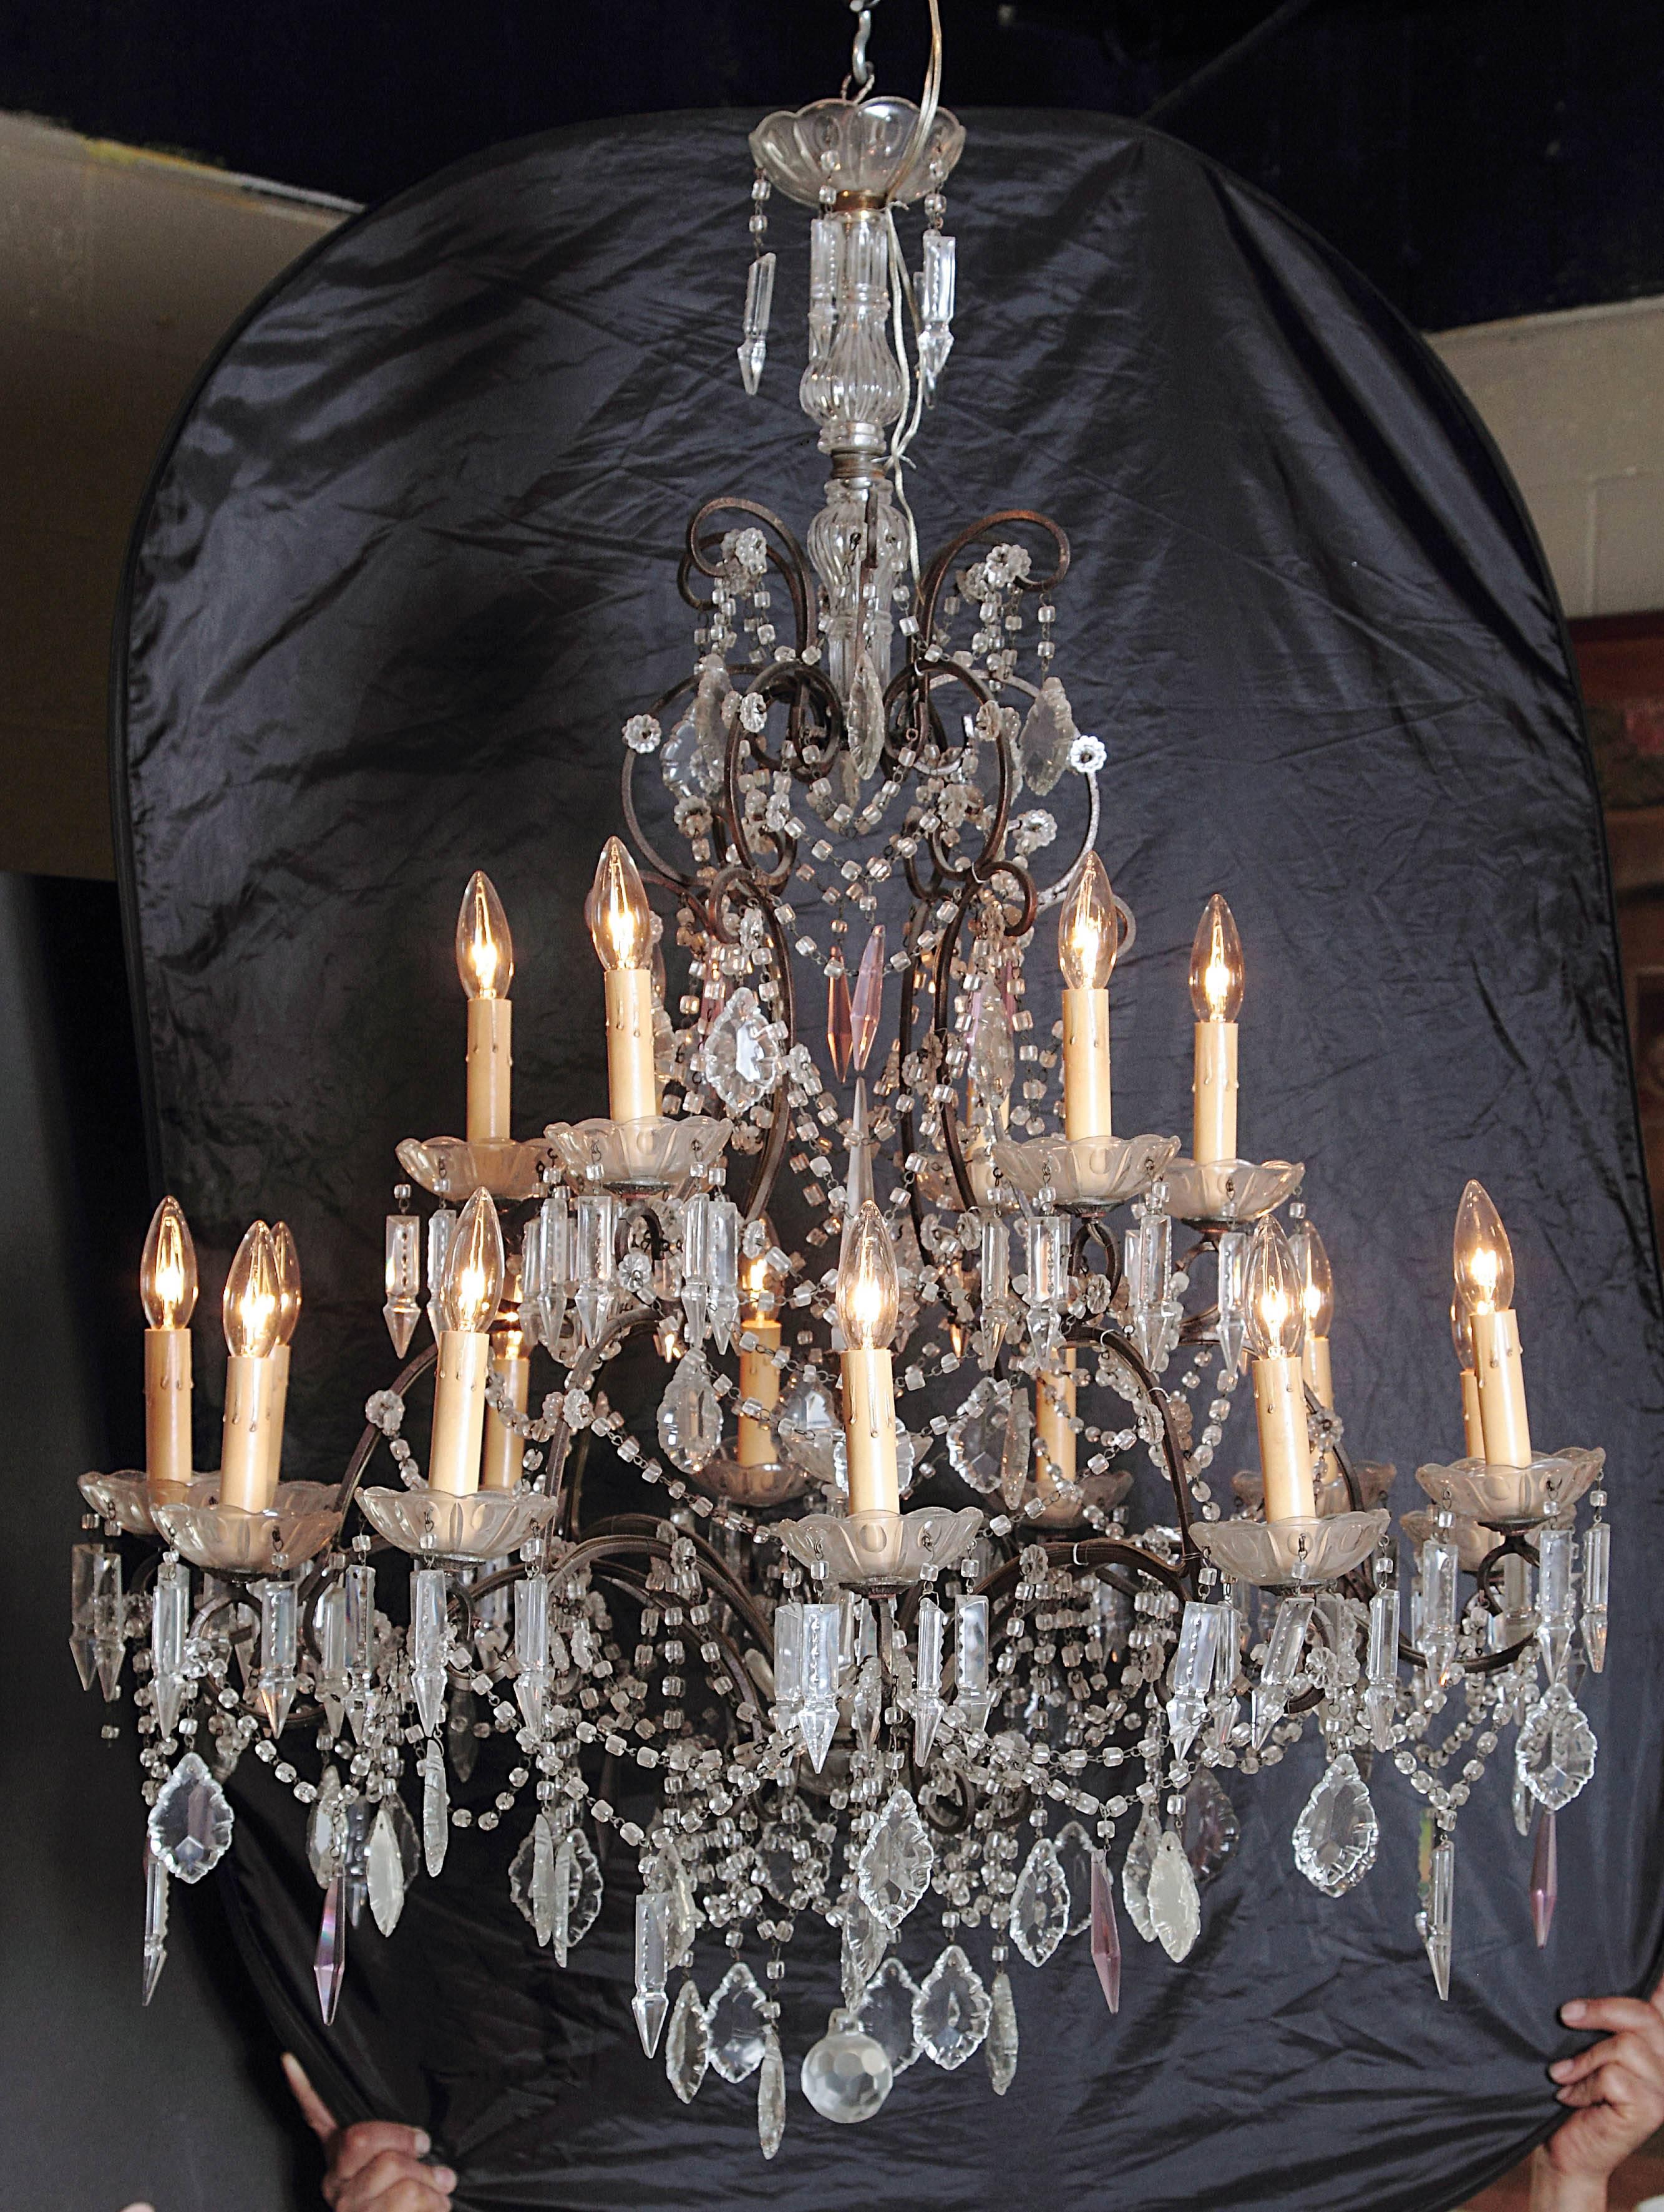 This elegant crystal and iron light fixture was created in Italy, circa 1890. The intricate chandelier has eighteen candlestick lights on two graduated tiers with luxurious swags of crystal and glass pendants hanging throughout. The beautiful,